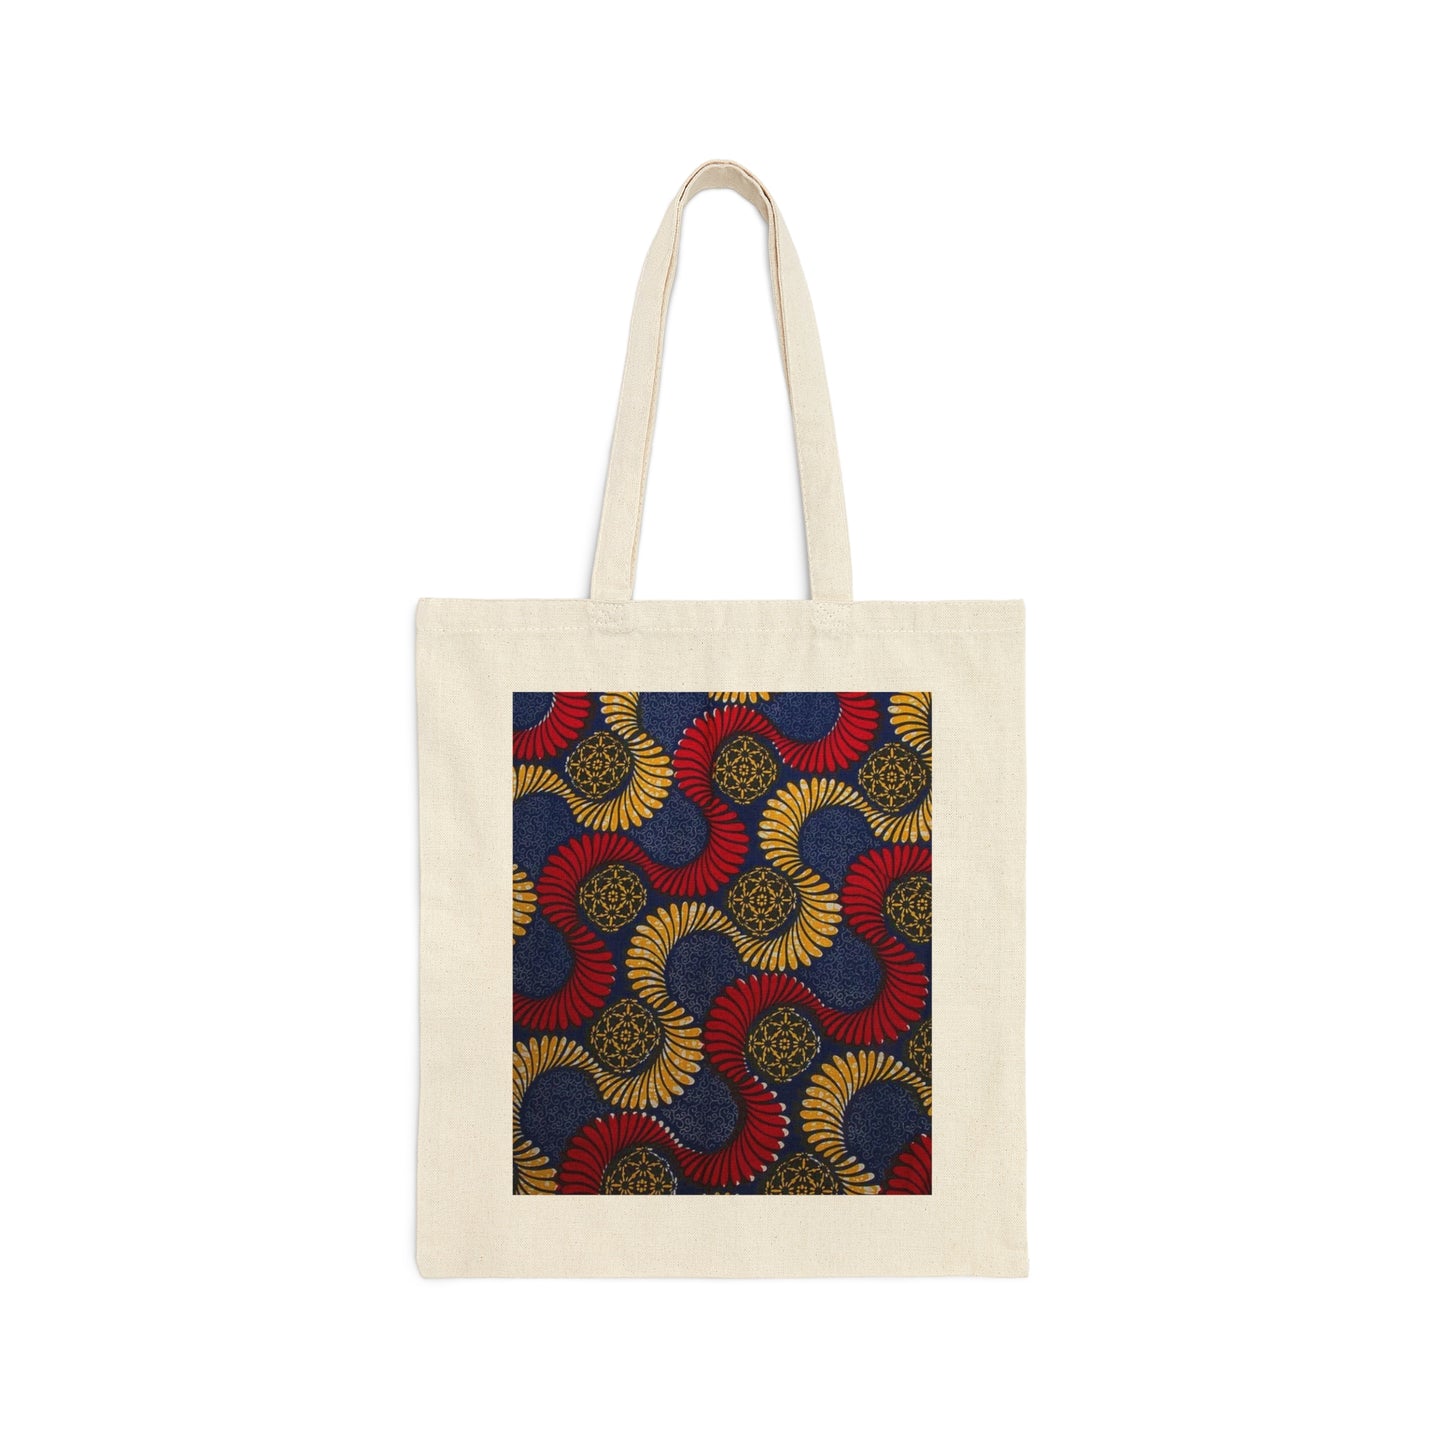 Red Blue and Beige Cotton Canvas Tote Bag